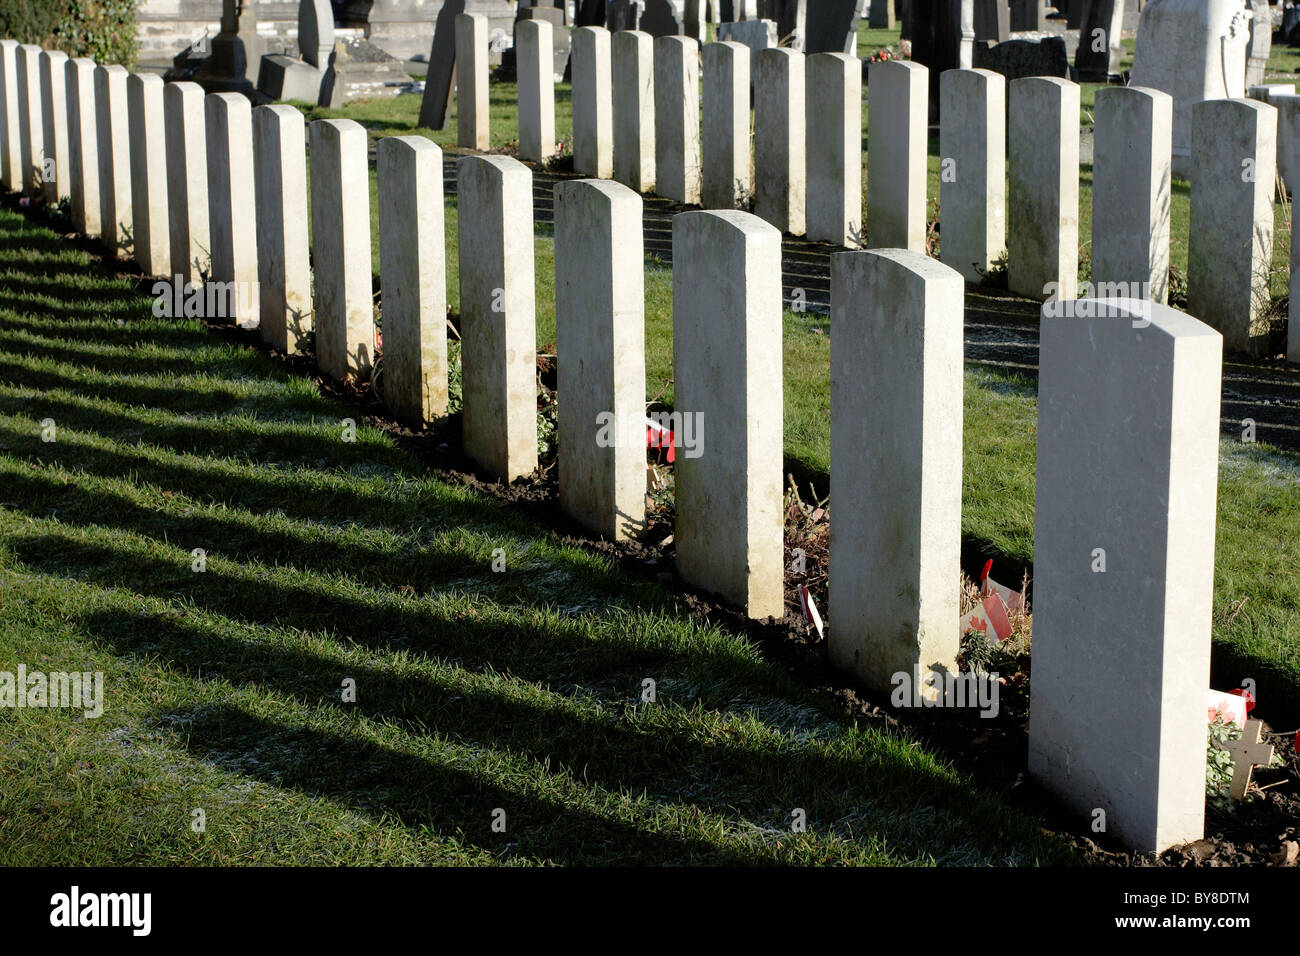 A row of Canadian gravestones in the church yard of the St Margaret's ...